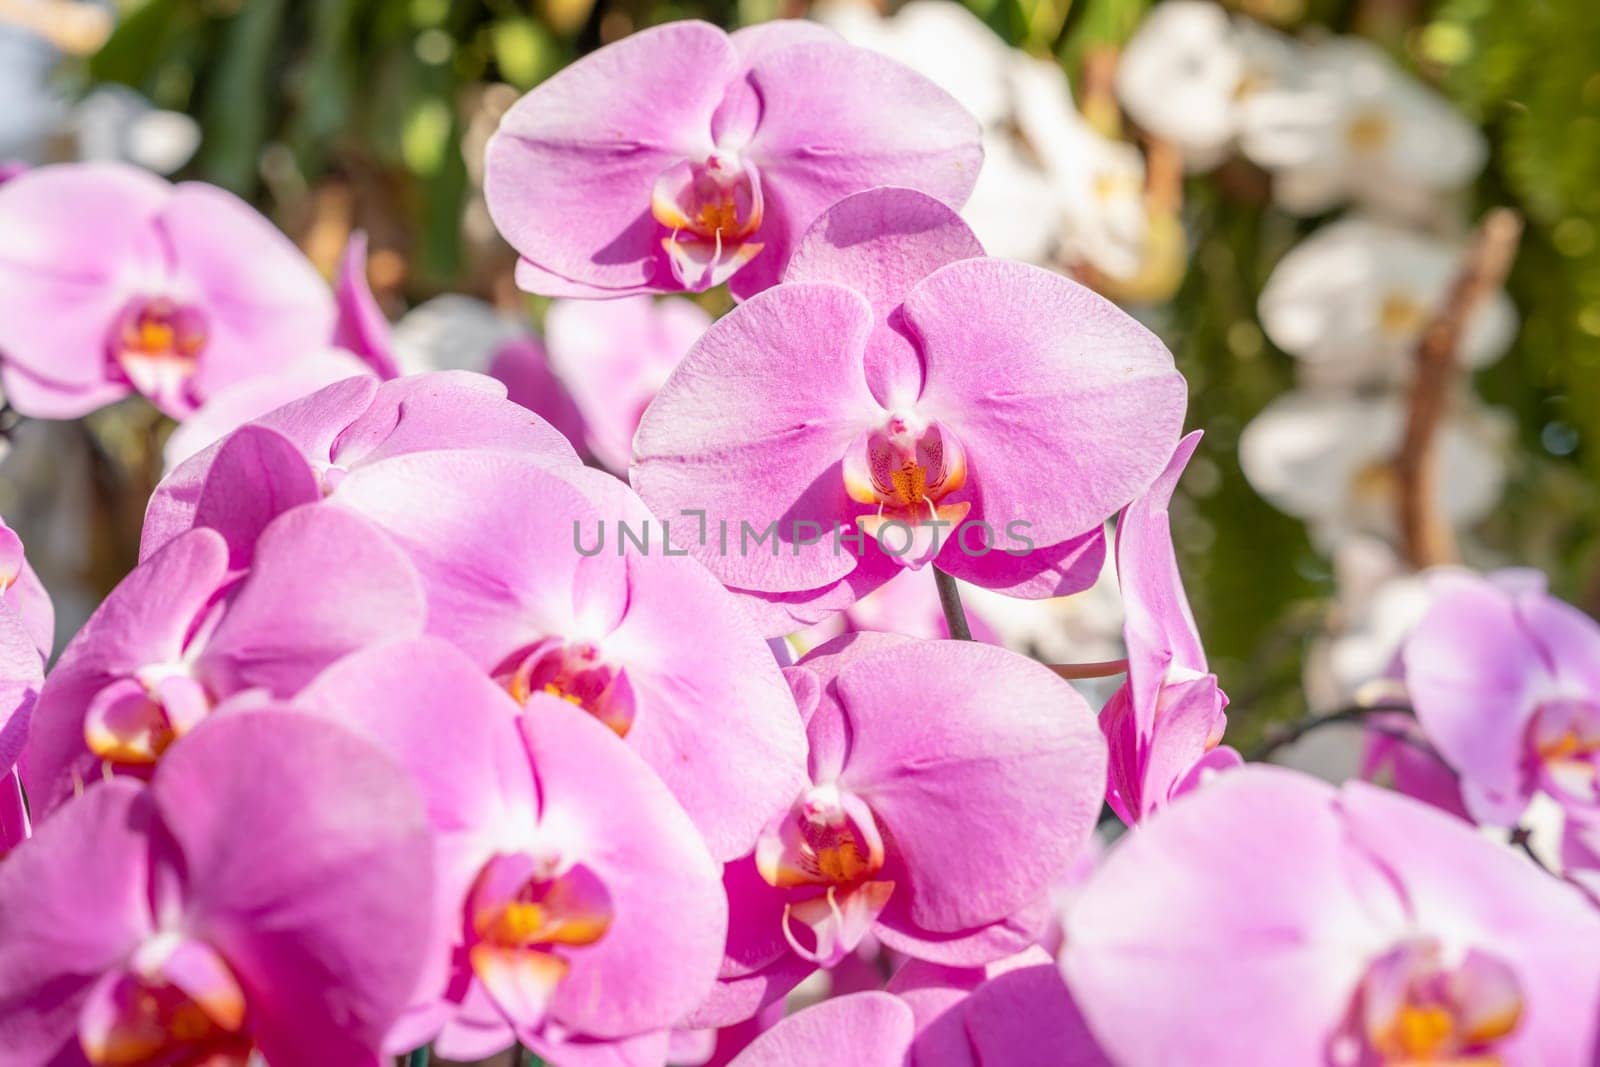 The Pink Moth orchids (Phalaenopsis amabilis), commonly known as the moon orchid, a species of flowering plant in the orchid family Orchidaceae by Gamjai